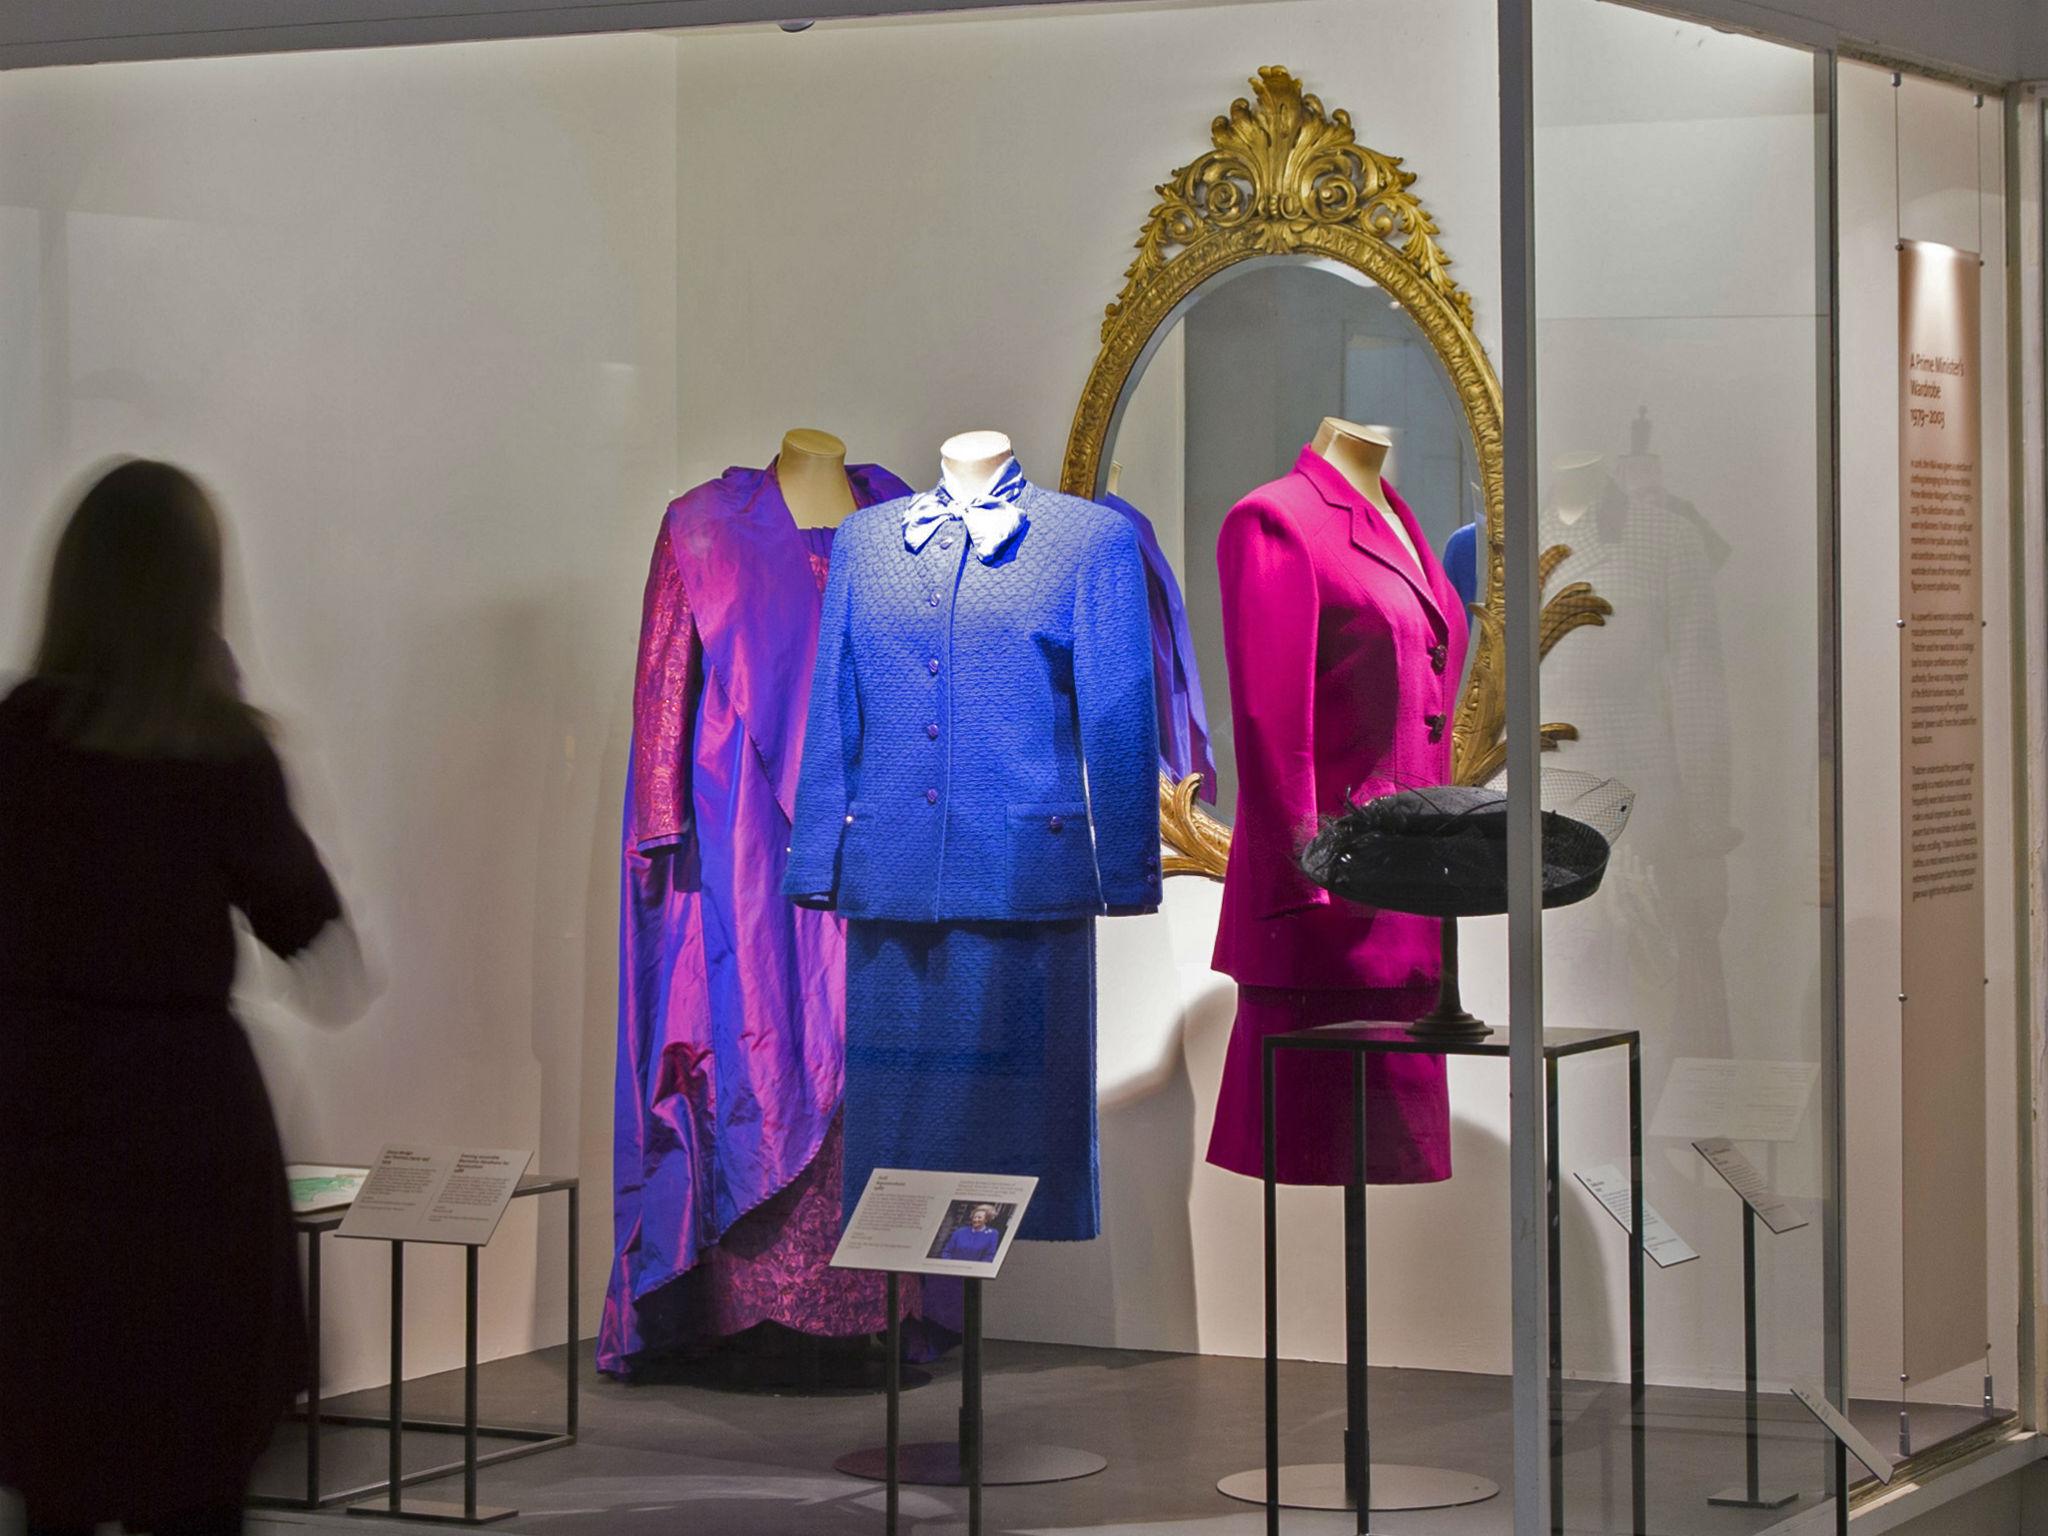 Items from Baroness Thatcher displayed at the Victoria and Albert Museum